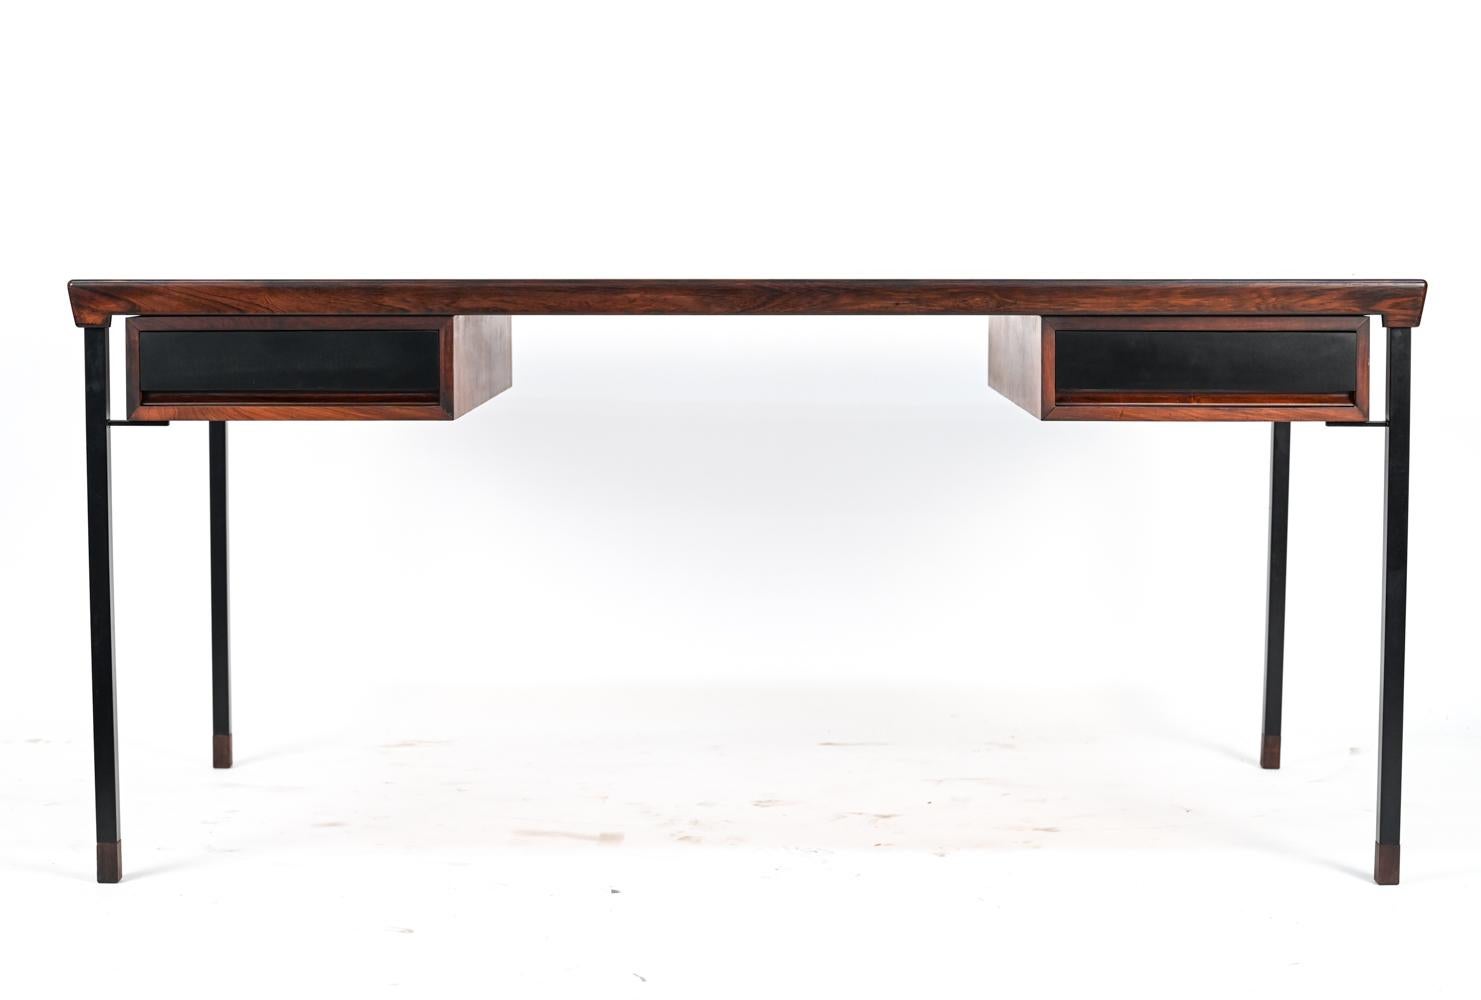 This fabulous Danish 
midcentury writing desk was the result of a collaborative design effort by Peter Hvidt and Orla Molgaard-Nielsen for Soborg Mobelfabrik, circa 1950s. Like Hvidt and Molgaard's other collaborations, this desk features steel legs